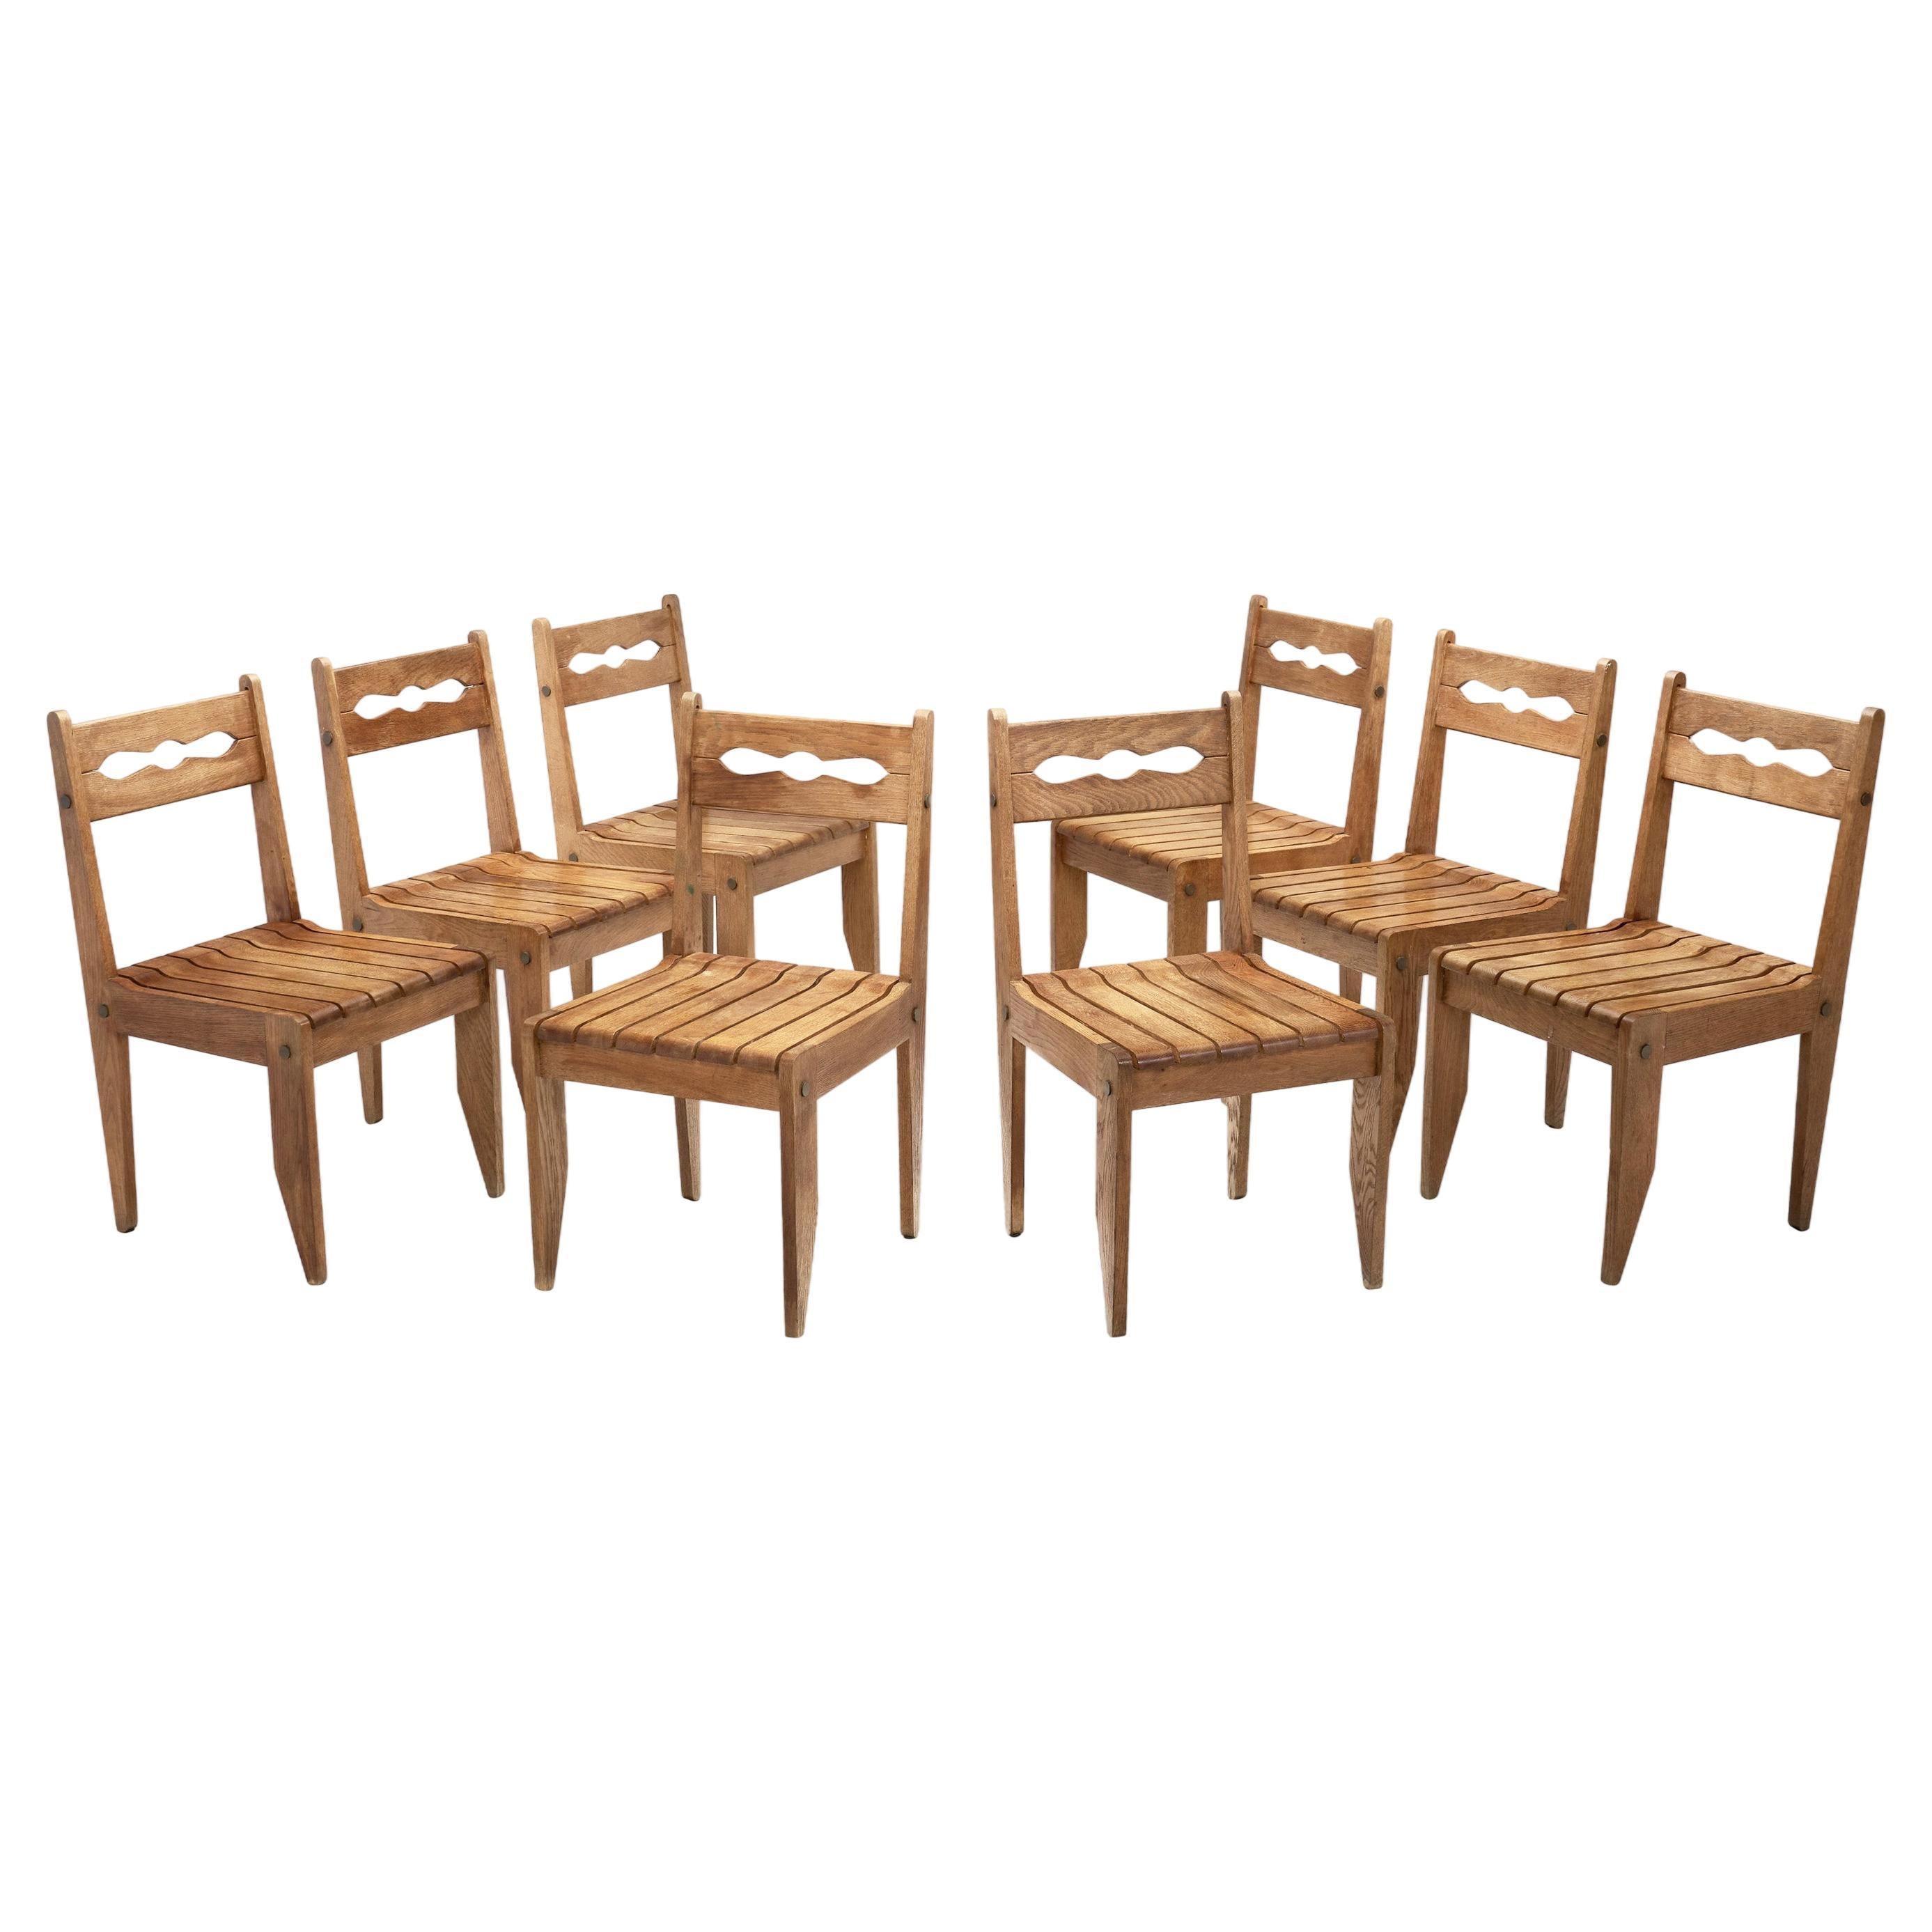 Guillerme et Chambron Oak Chairs with Wooden Slatted Seats, France 1960s For Sale